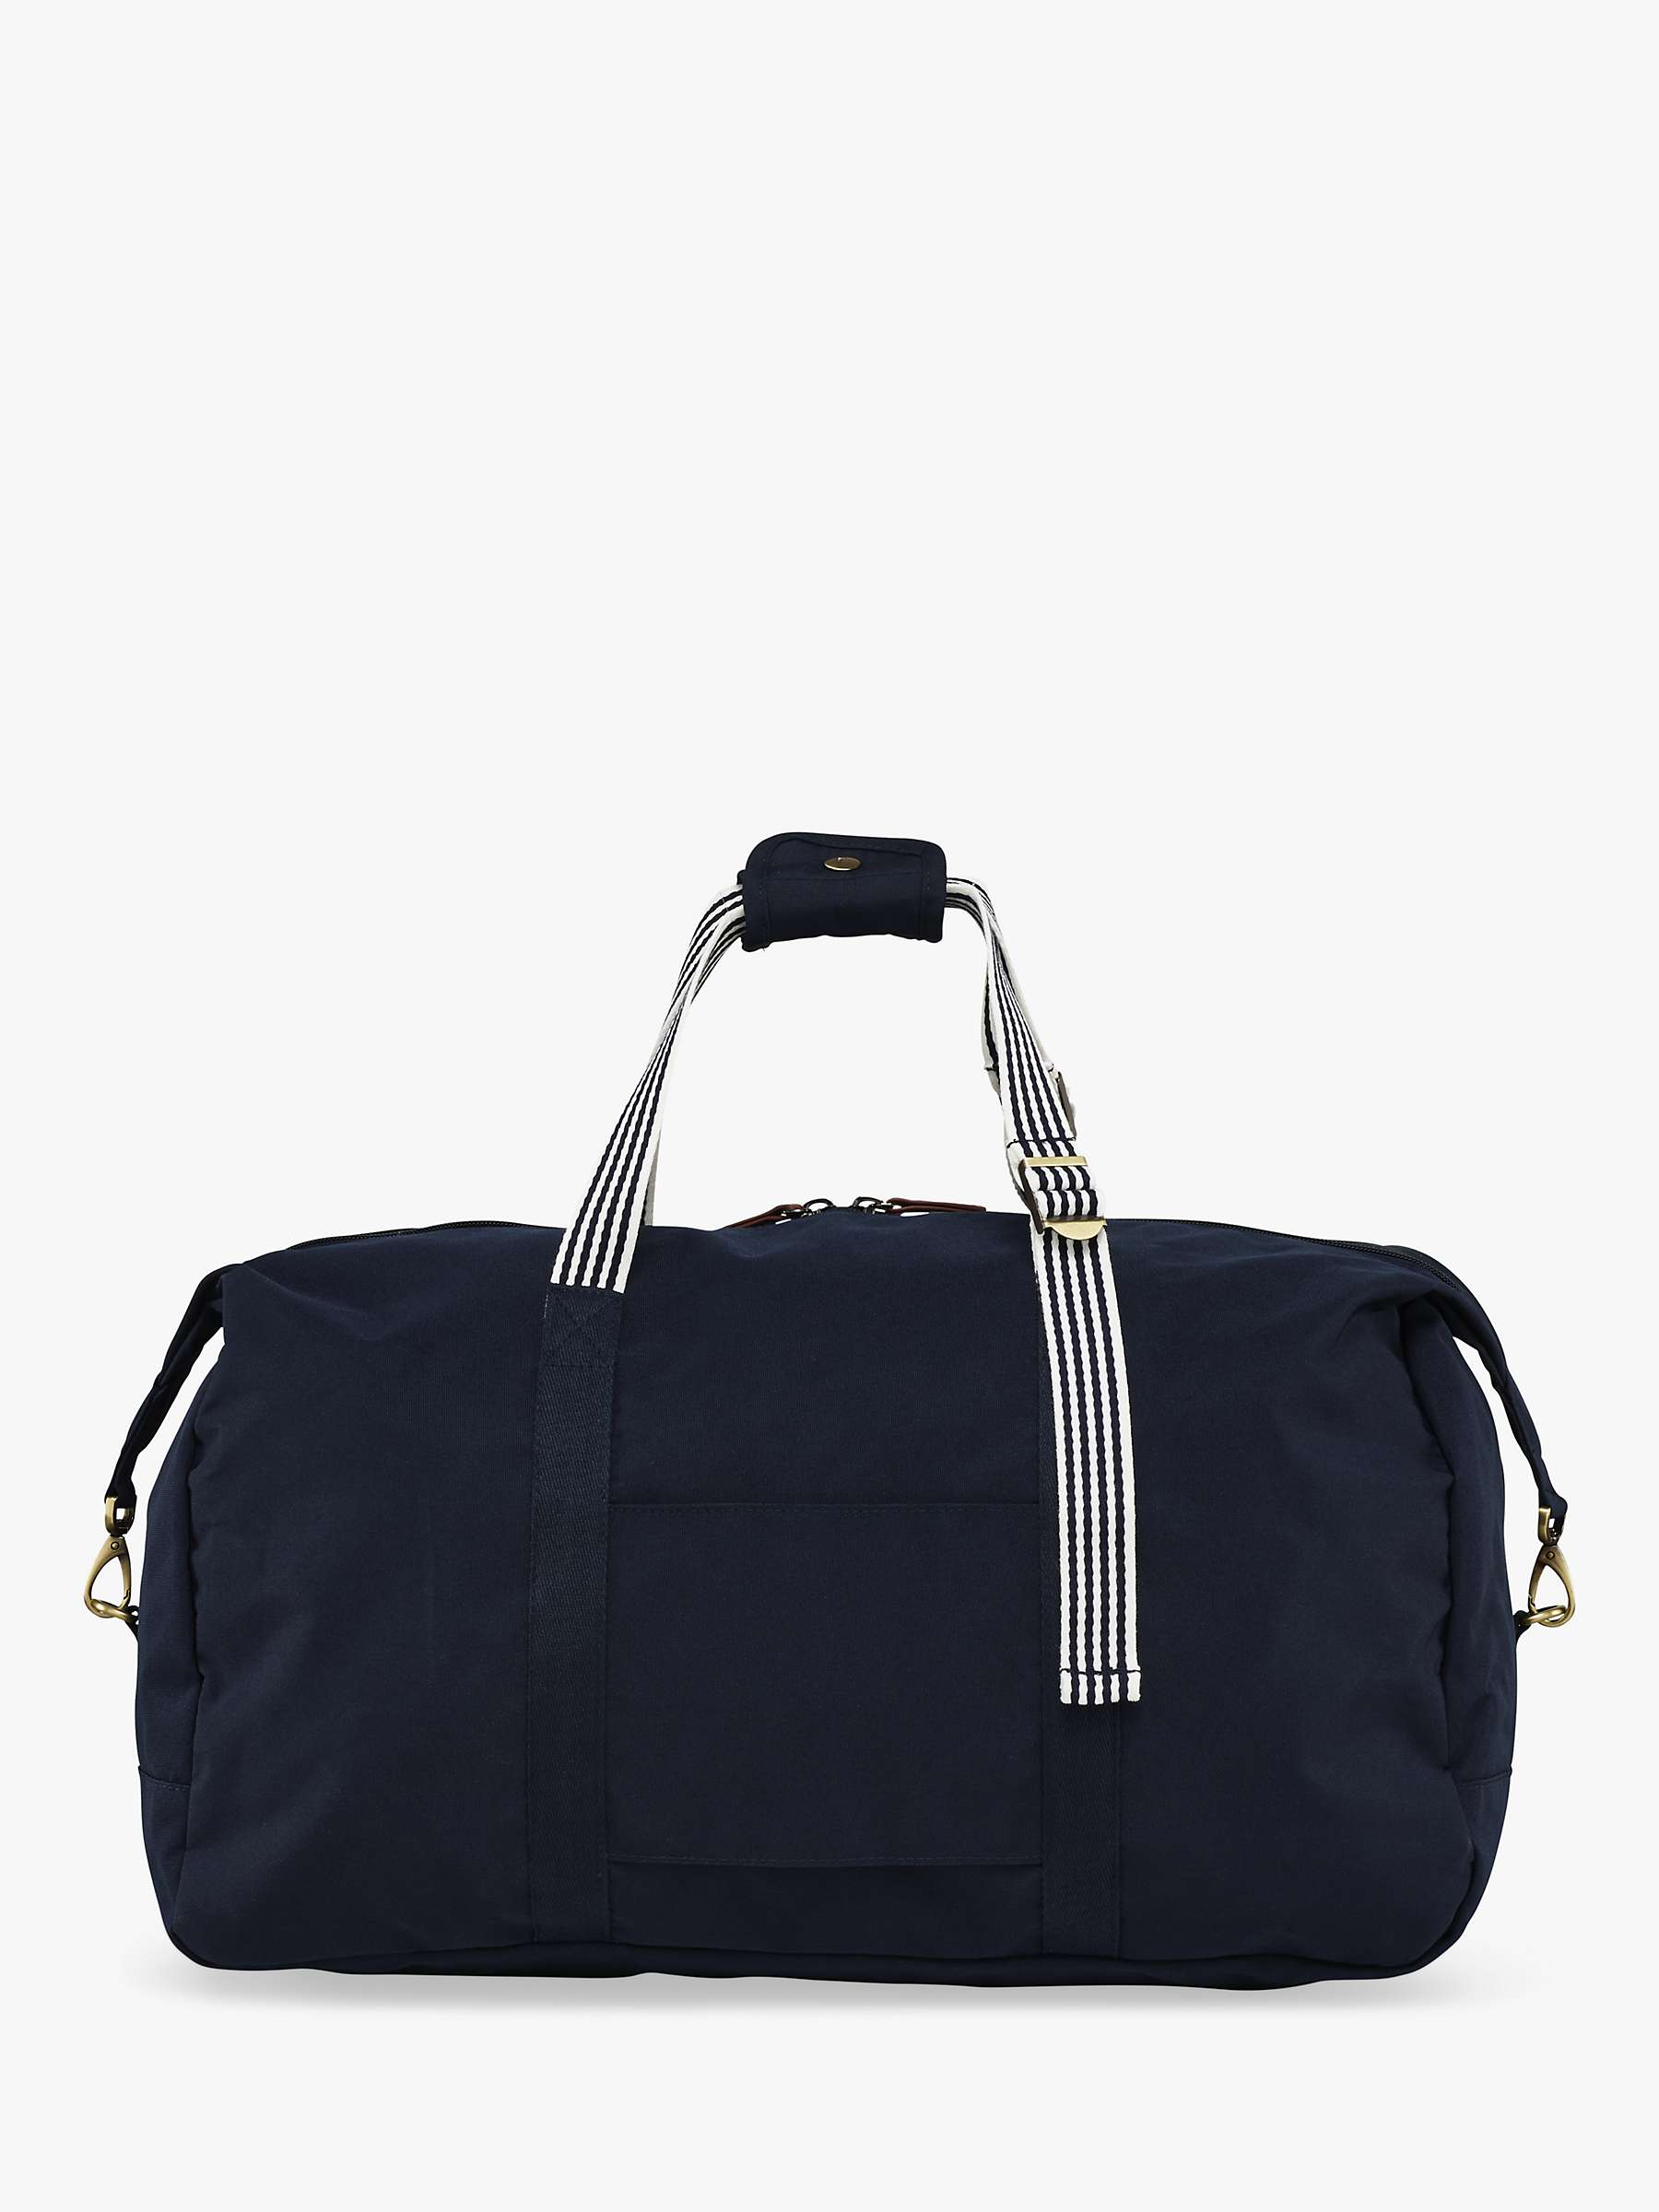 Buy Joules Coast Collection Duffle Bag Online at johnlewis.com